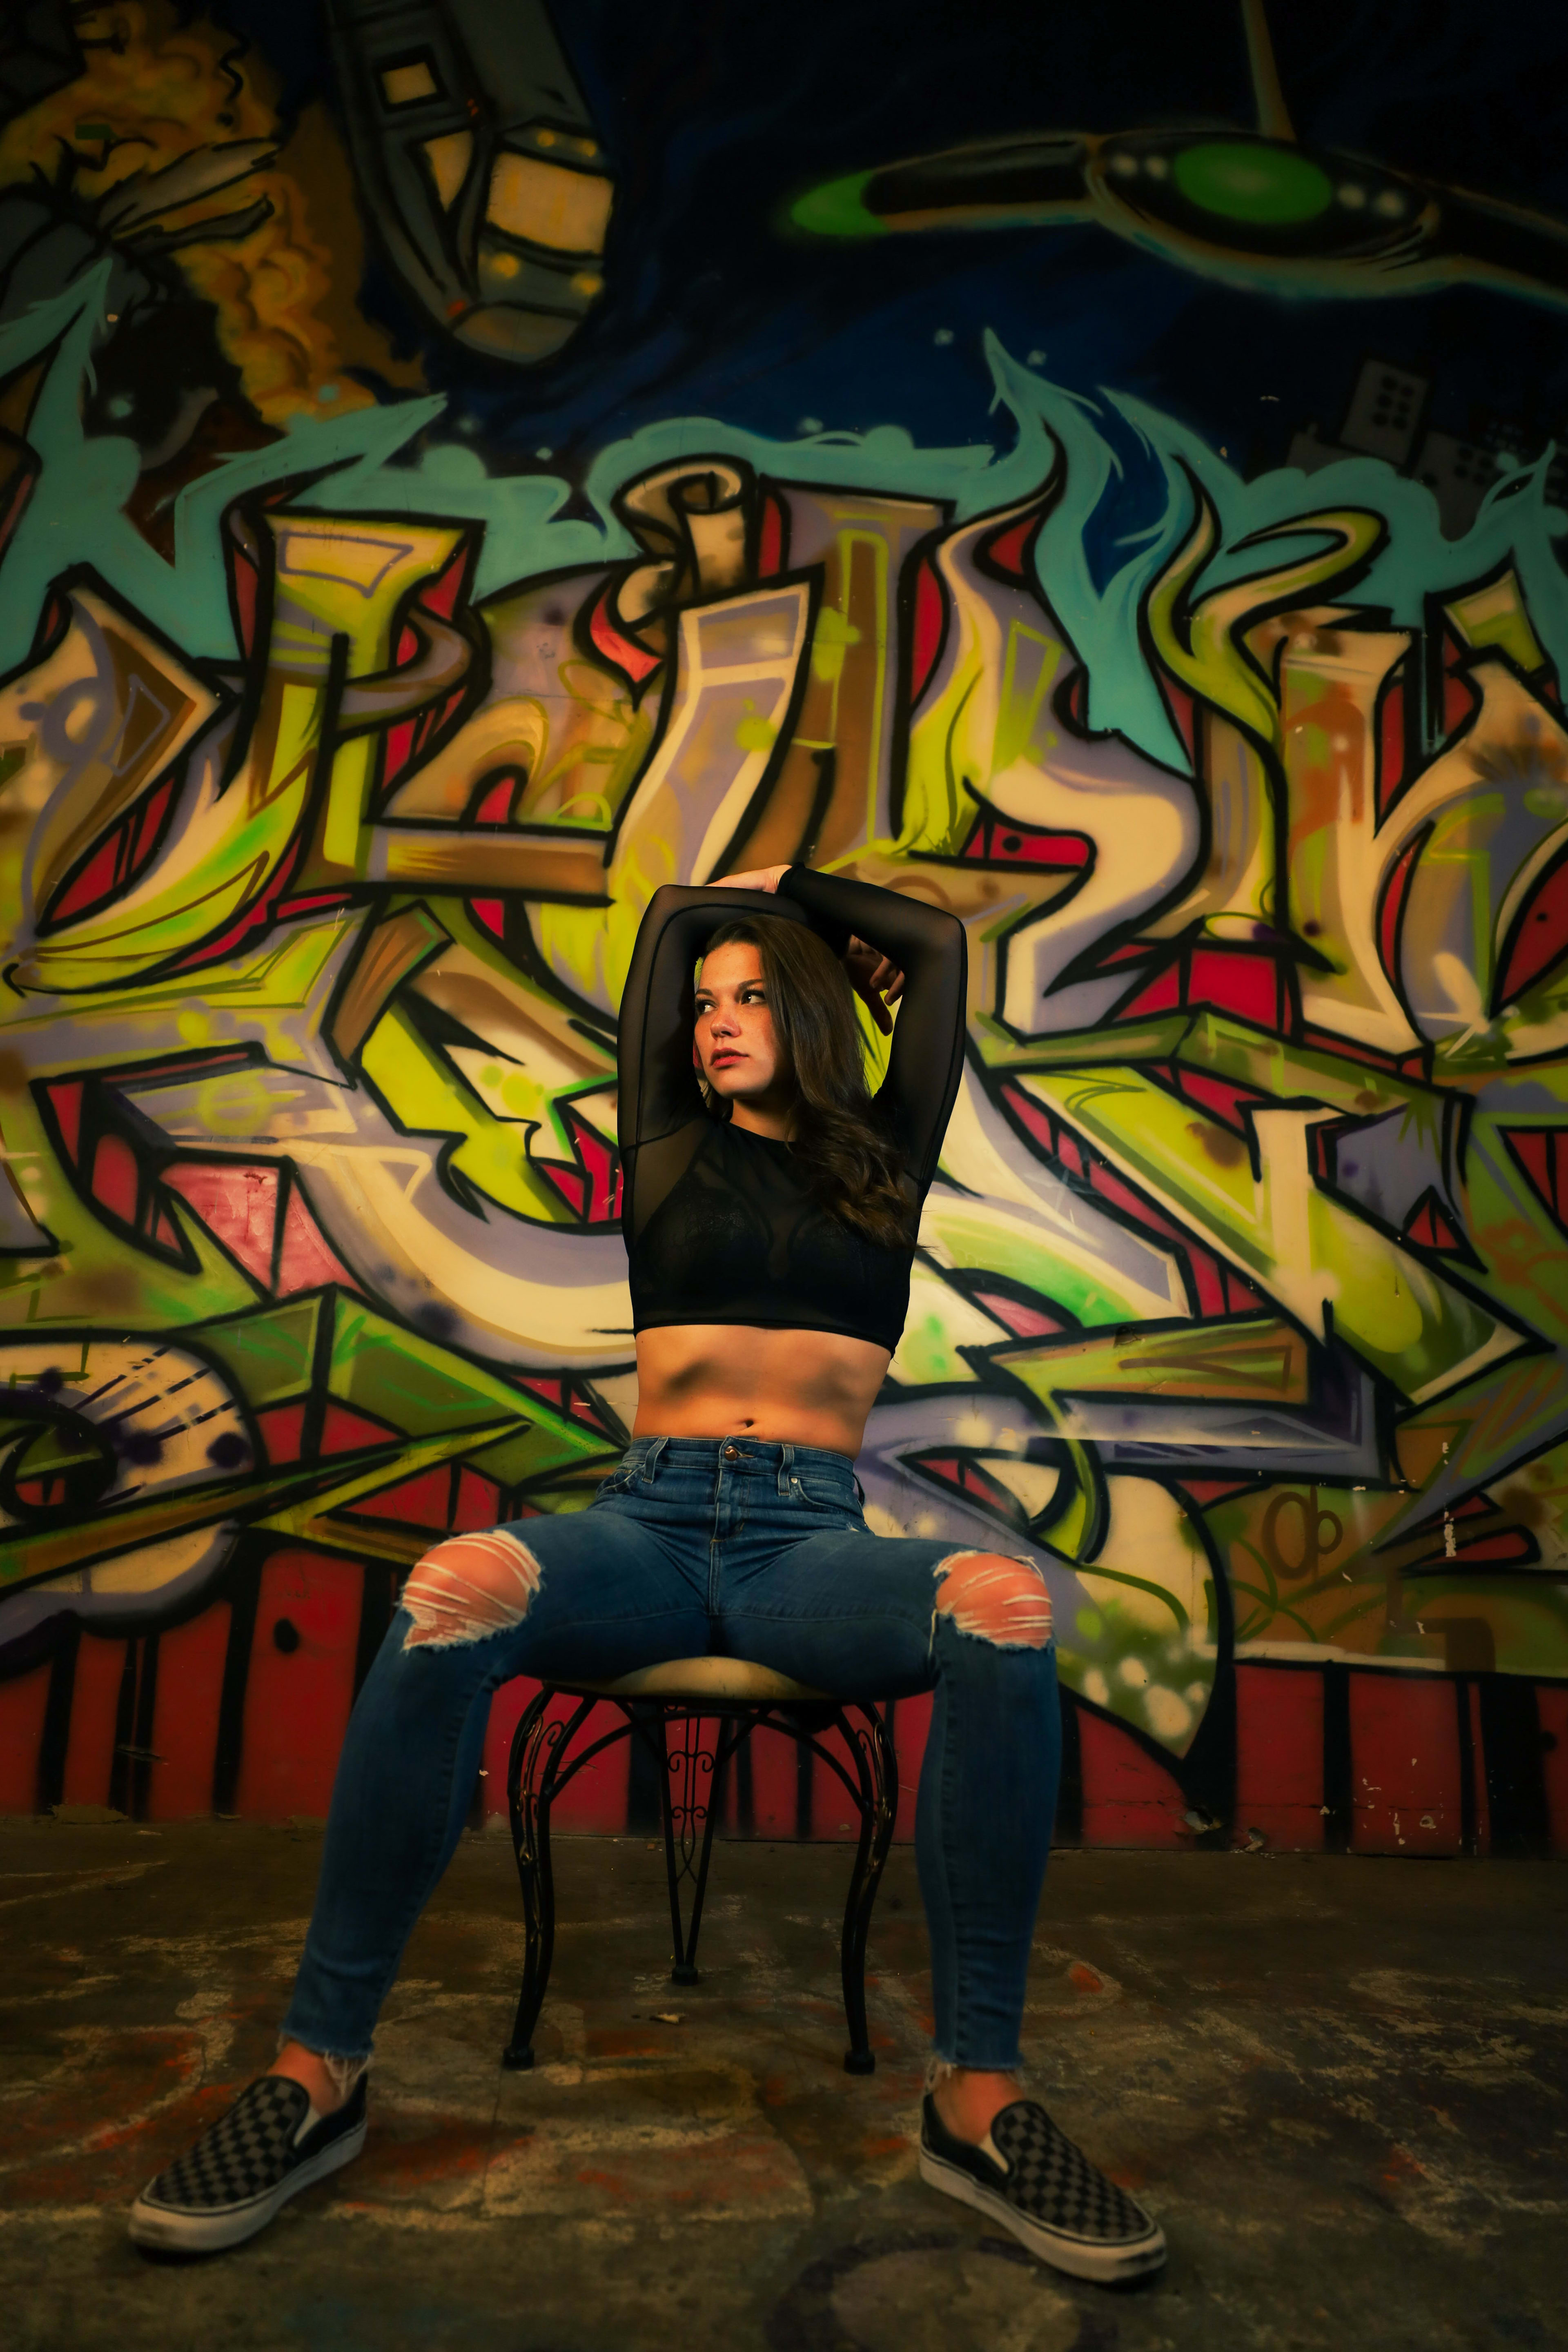 A woman posing for a photoshoot in front of a graffiti-covered wall.